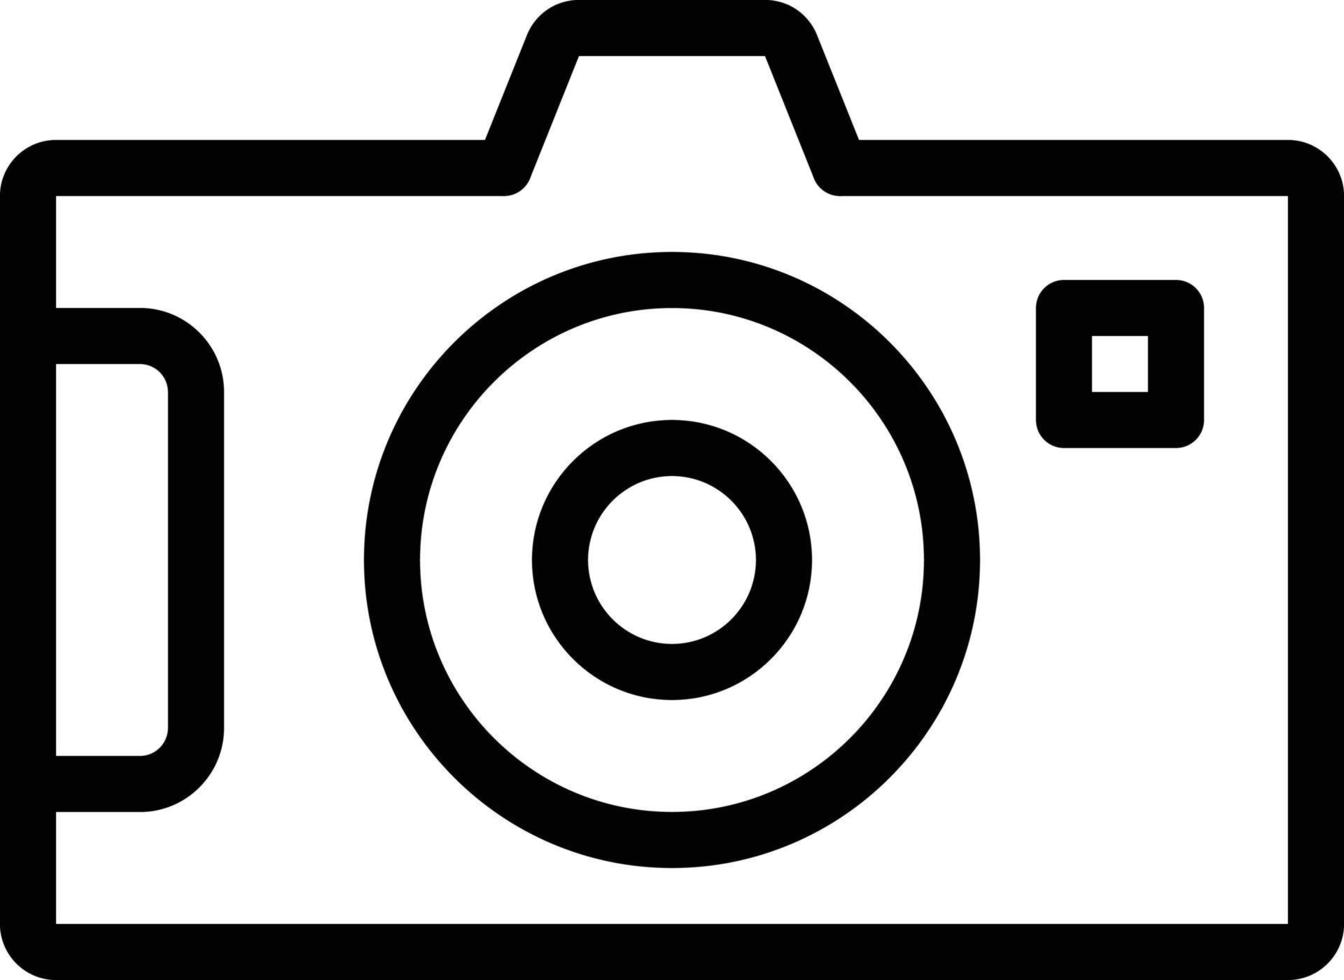 camera vector illustration on a background.Premium quality symbols.vector icons for concept and graphic design.